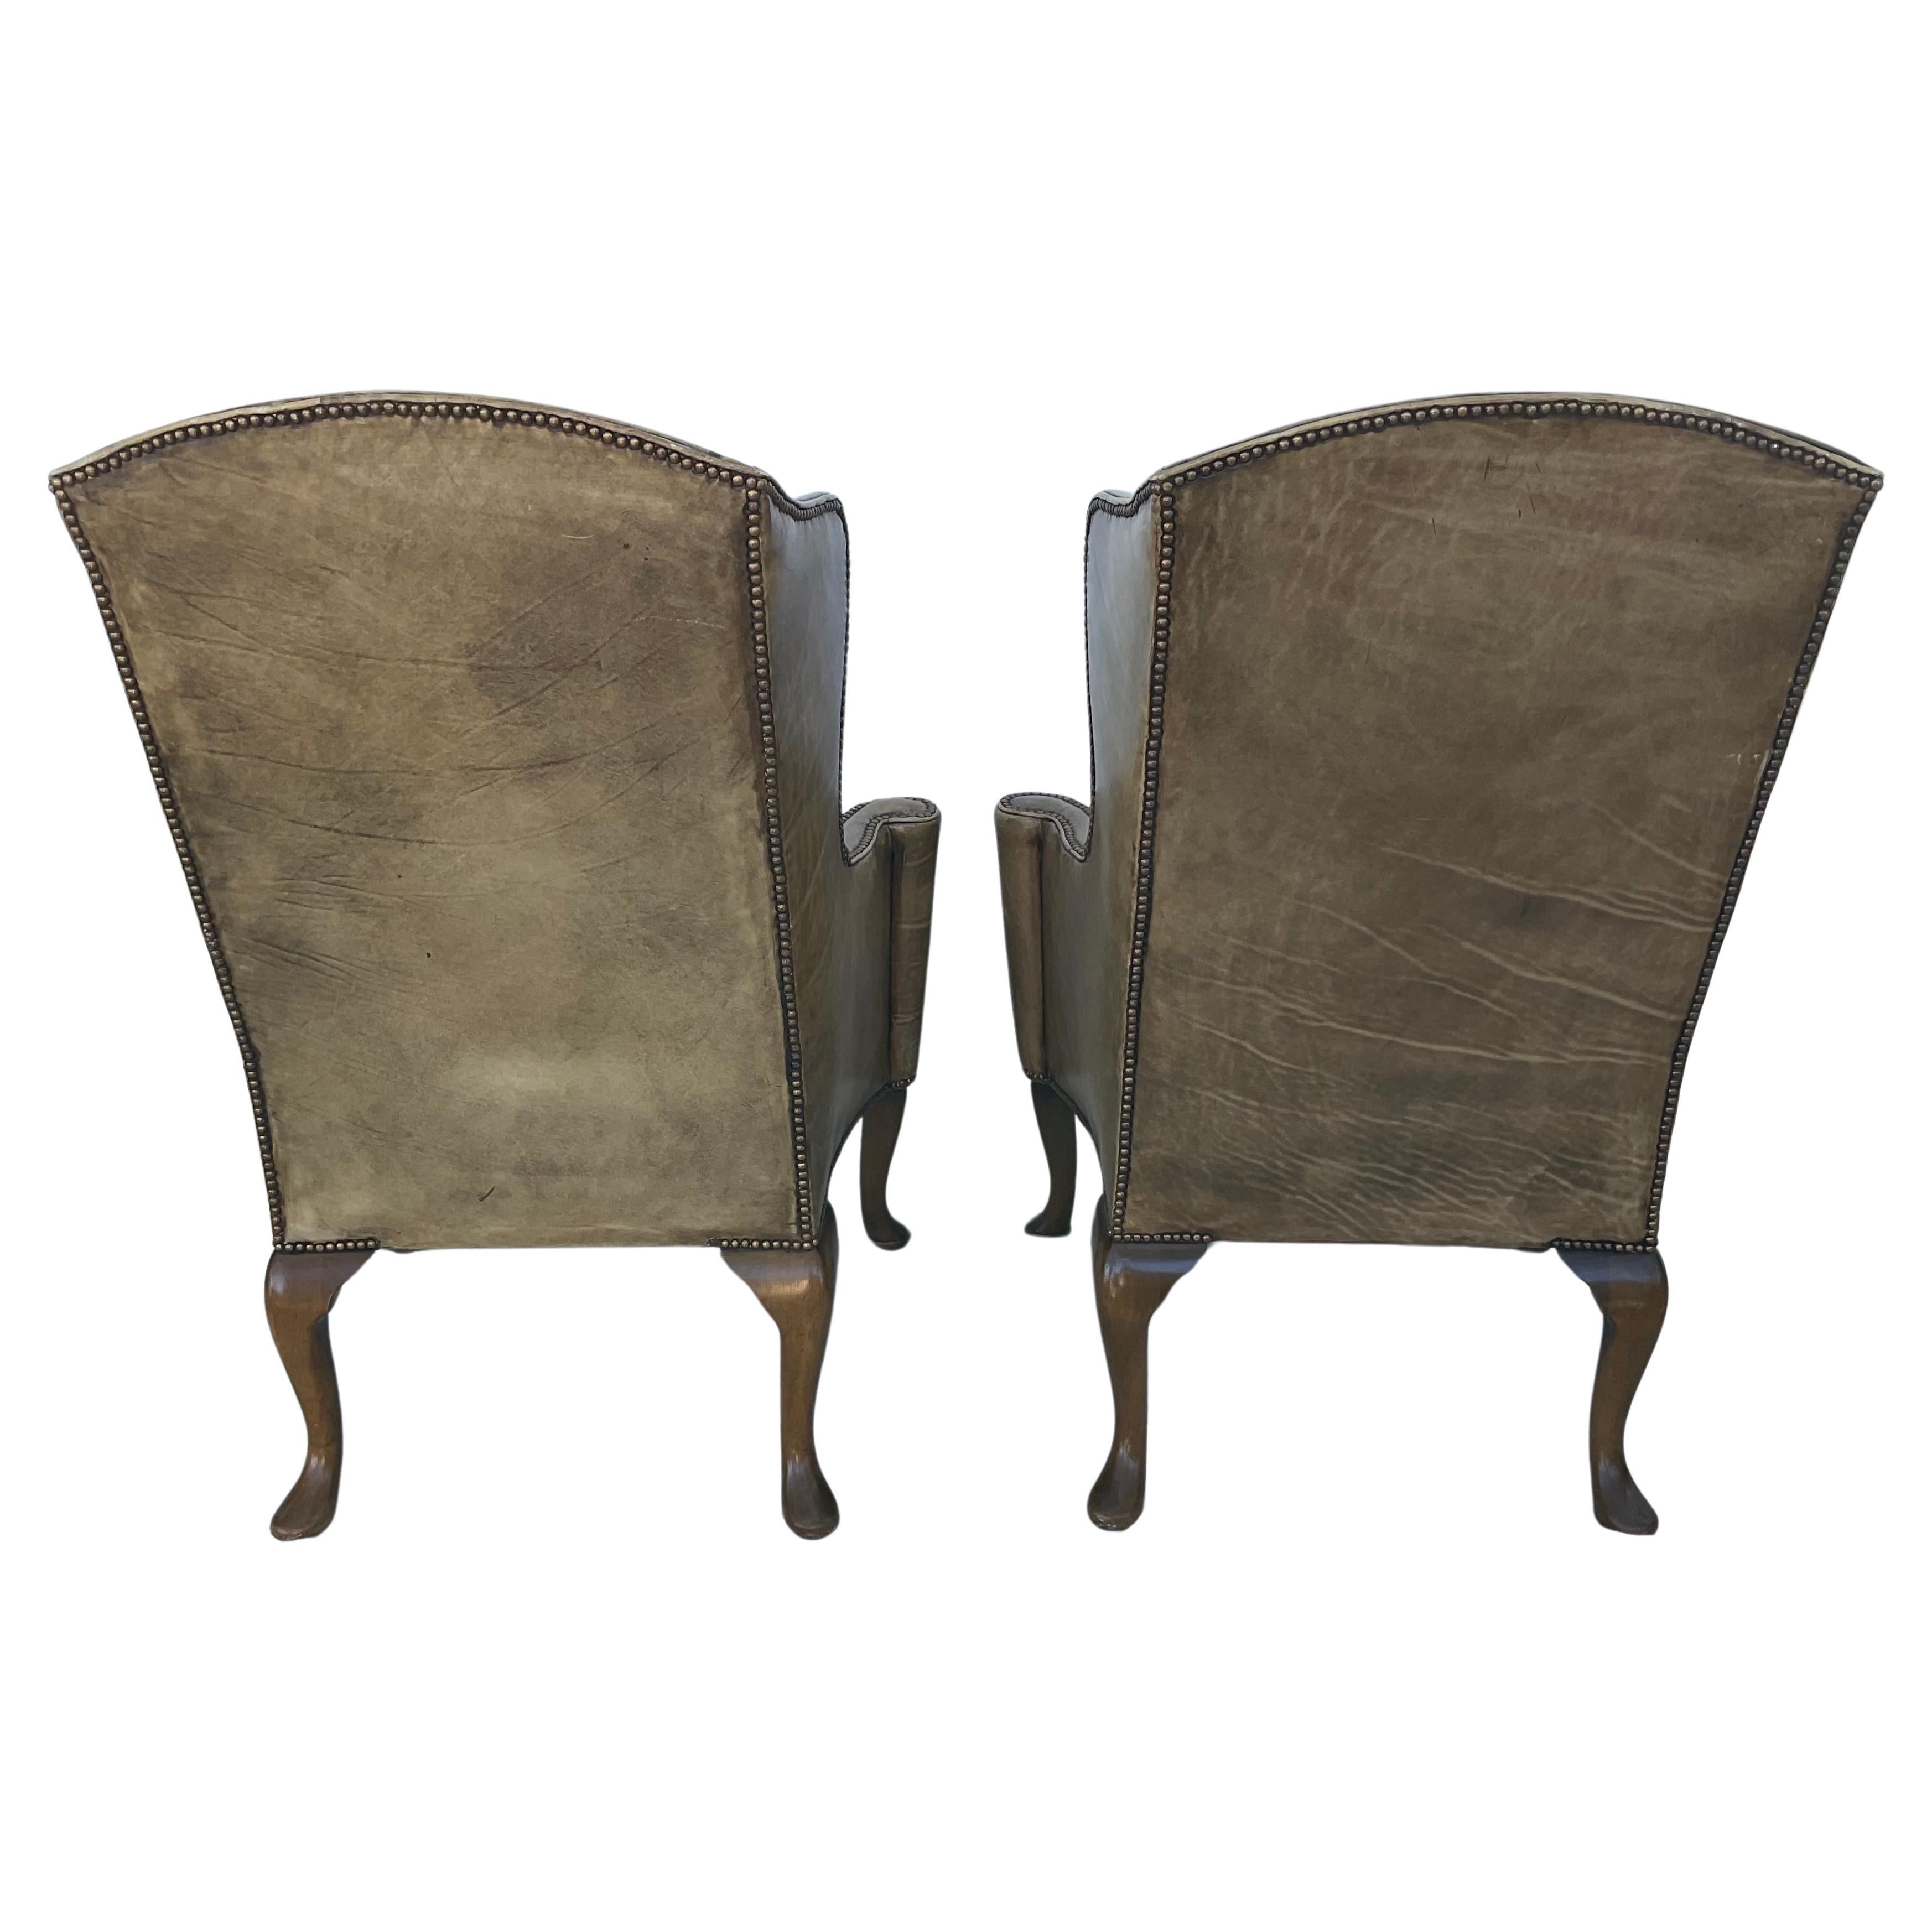 A pair of George I style leather winged armchairs. Each chair features an arched backrest with shaped wings and scrolled arm rests centering a loose cushioned seat, raised on cabriole legs. 